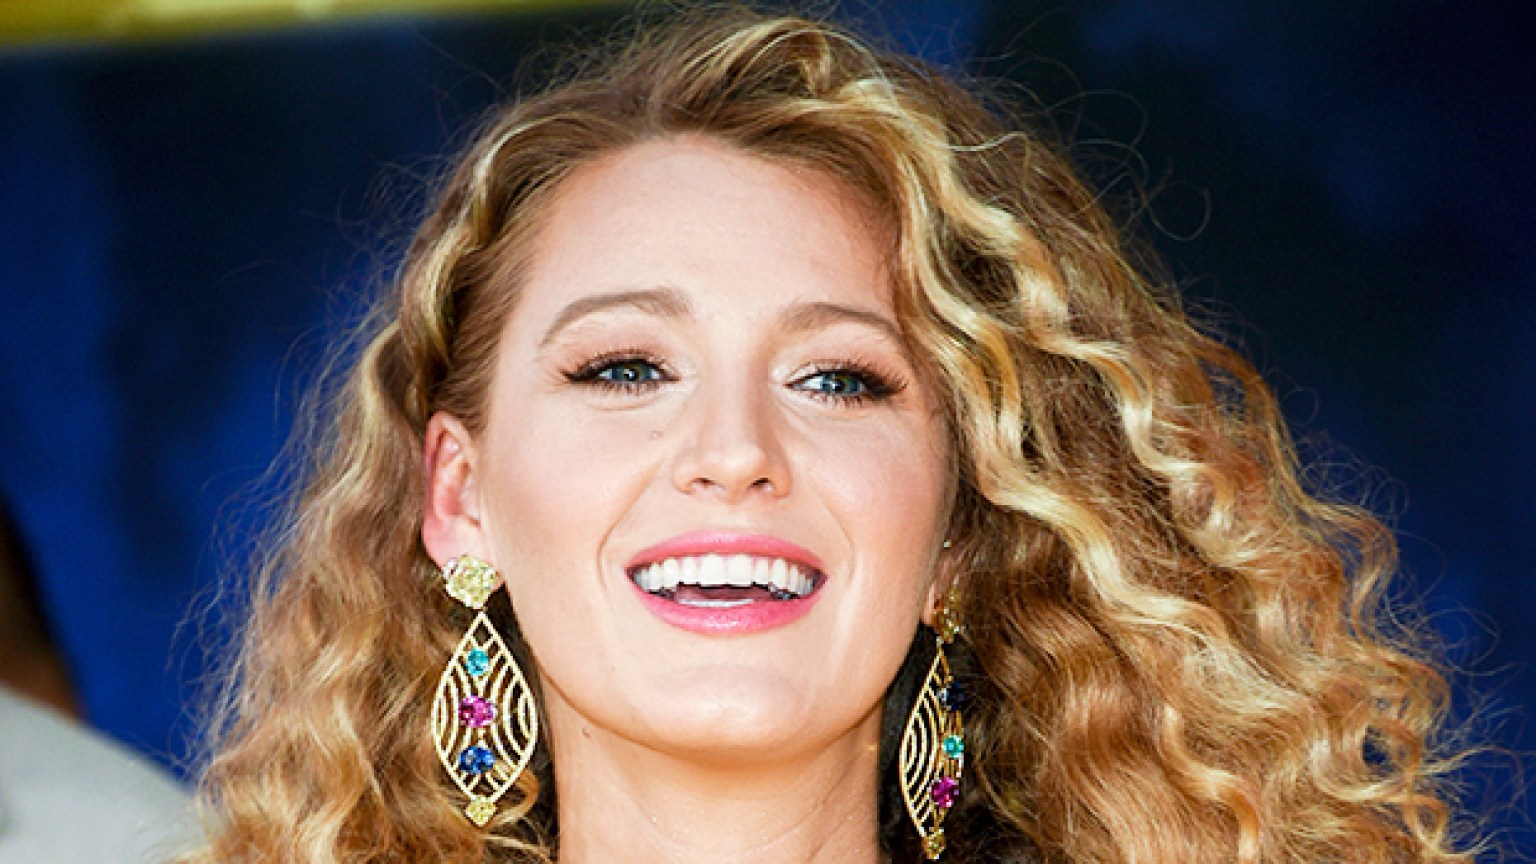 Blake Lively Posts Makeup Free Selfie With Messy Hair To Sum Up 2020 Hollywood Life